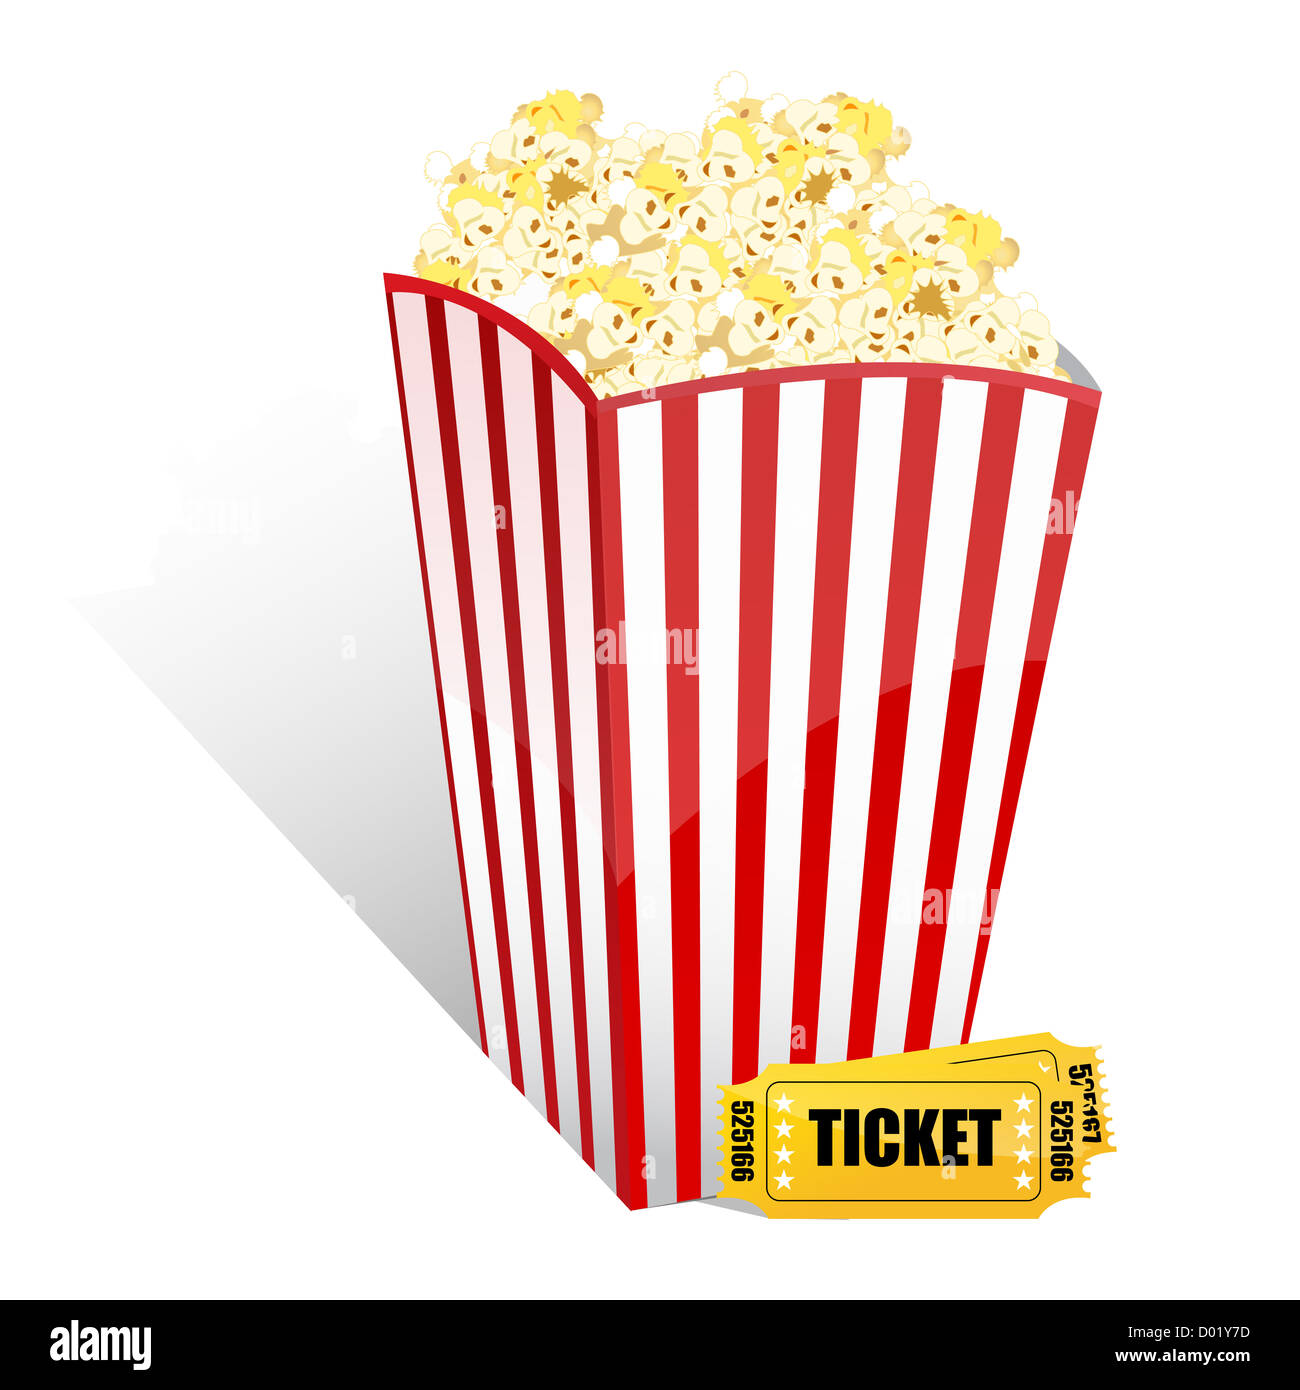 illustration of popcorn with movie tickets on white background Stock Photo